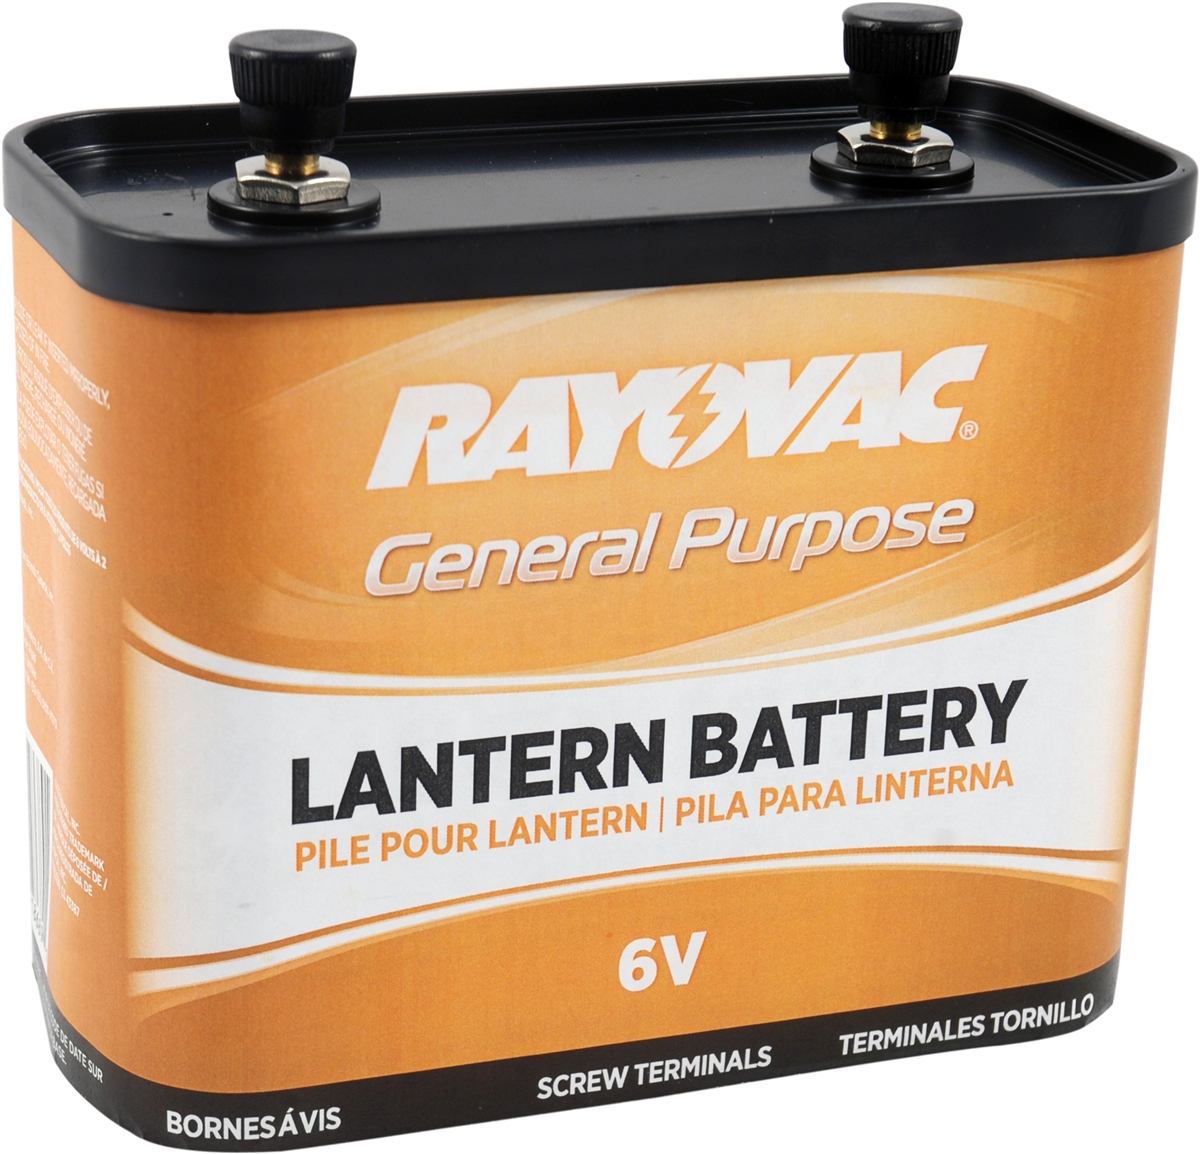 CTL10278 Rayovac Cordless Tool Battery Replacement